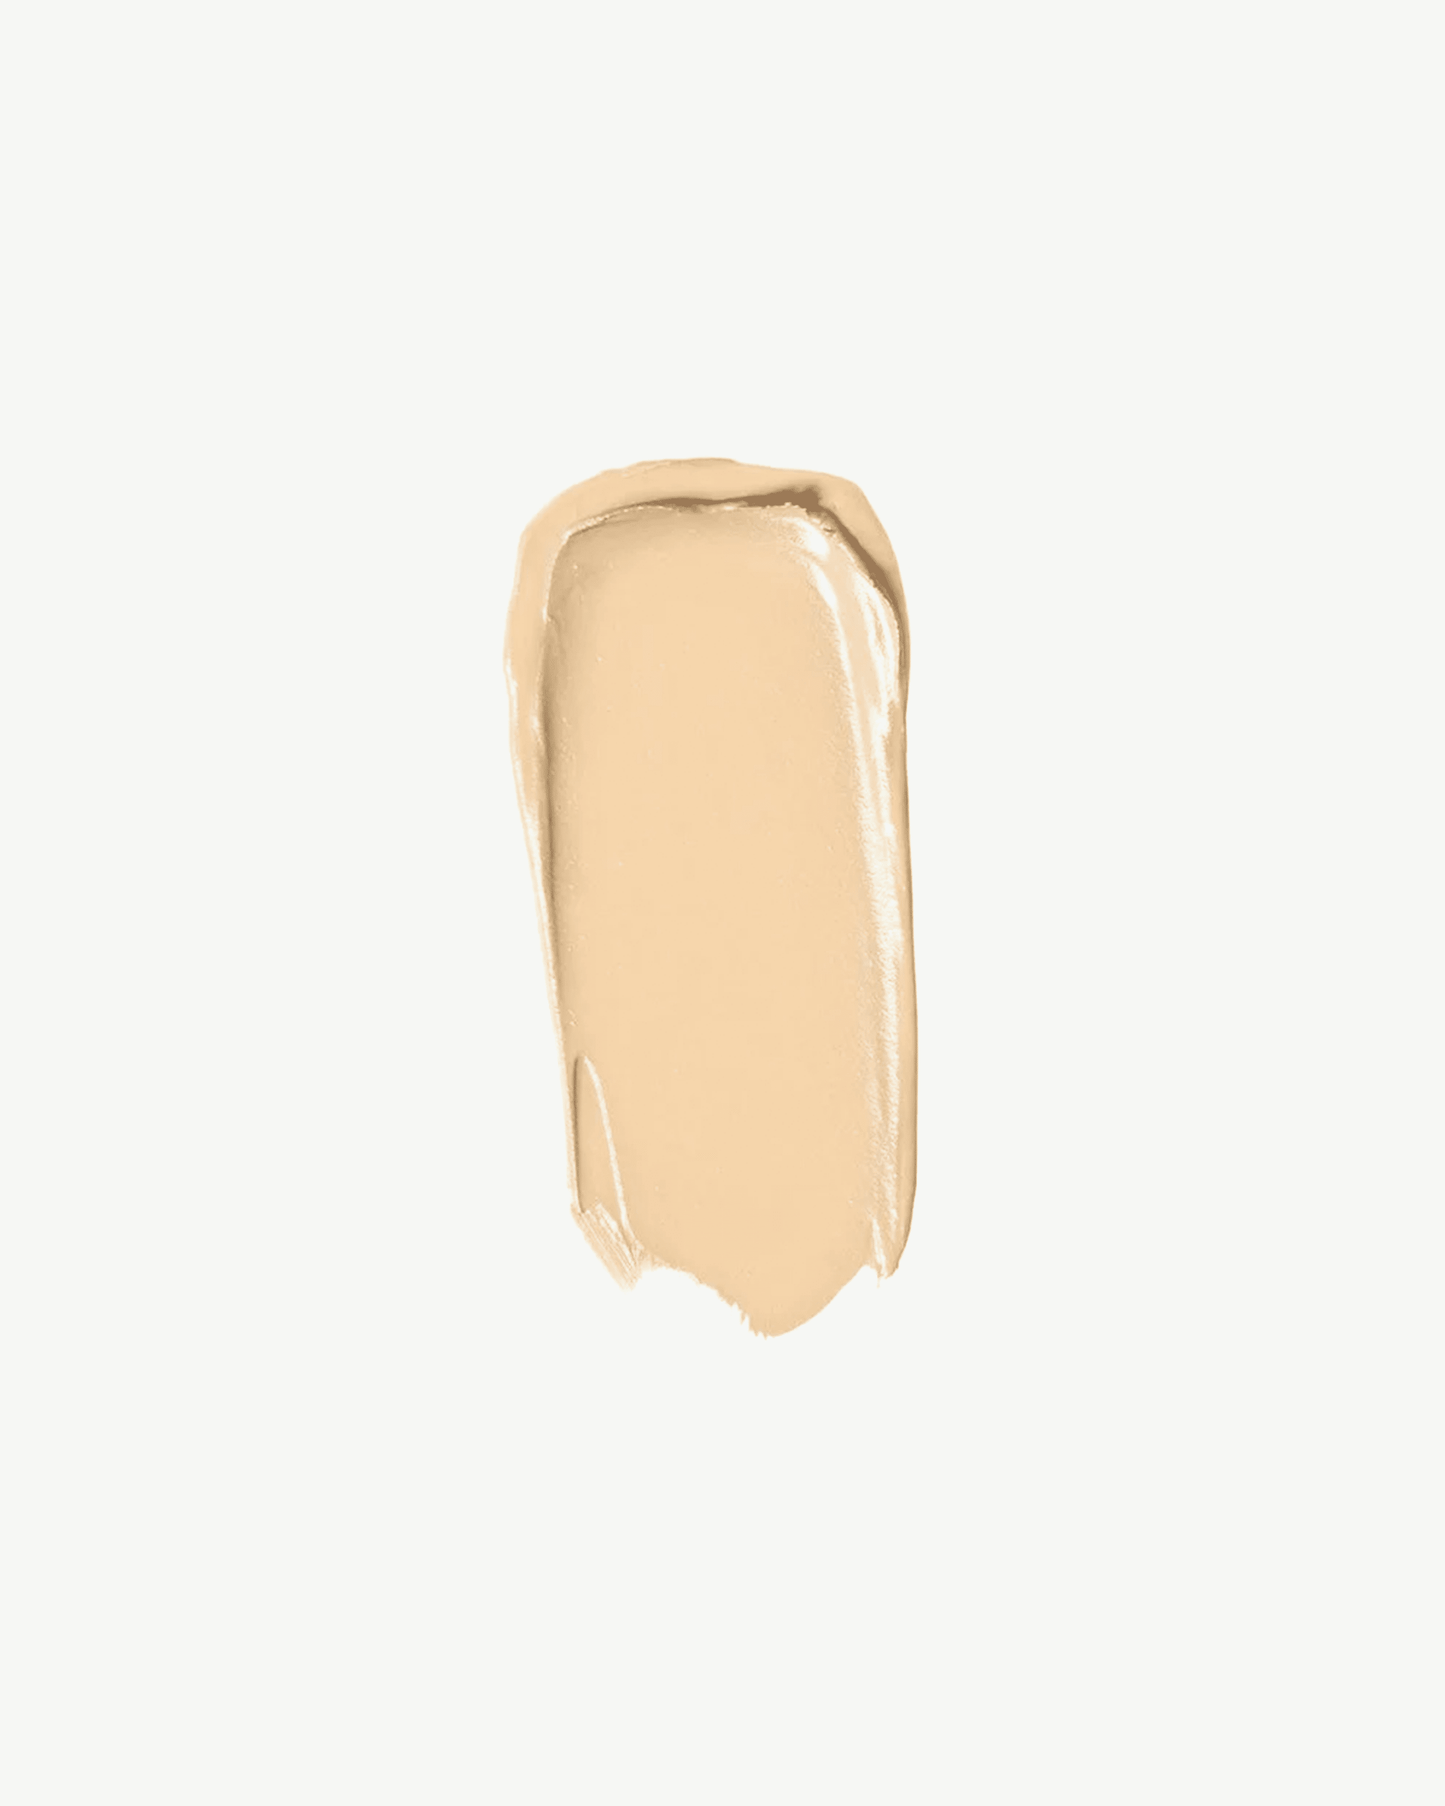 Gold 30 (light with gold undertones)